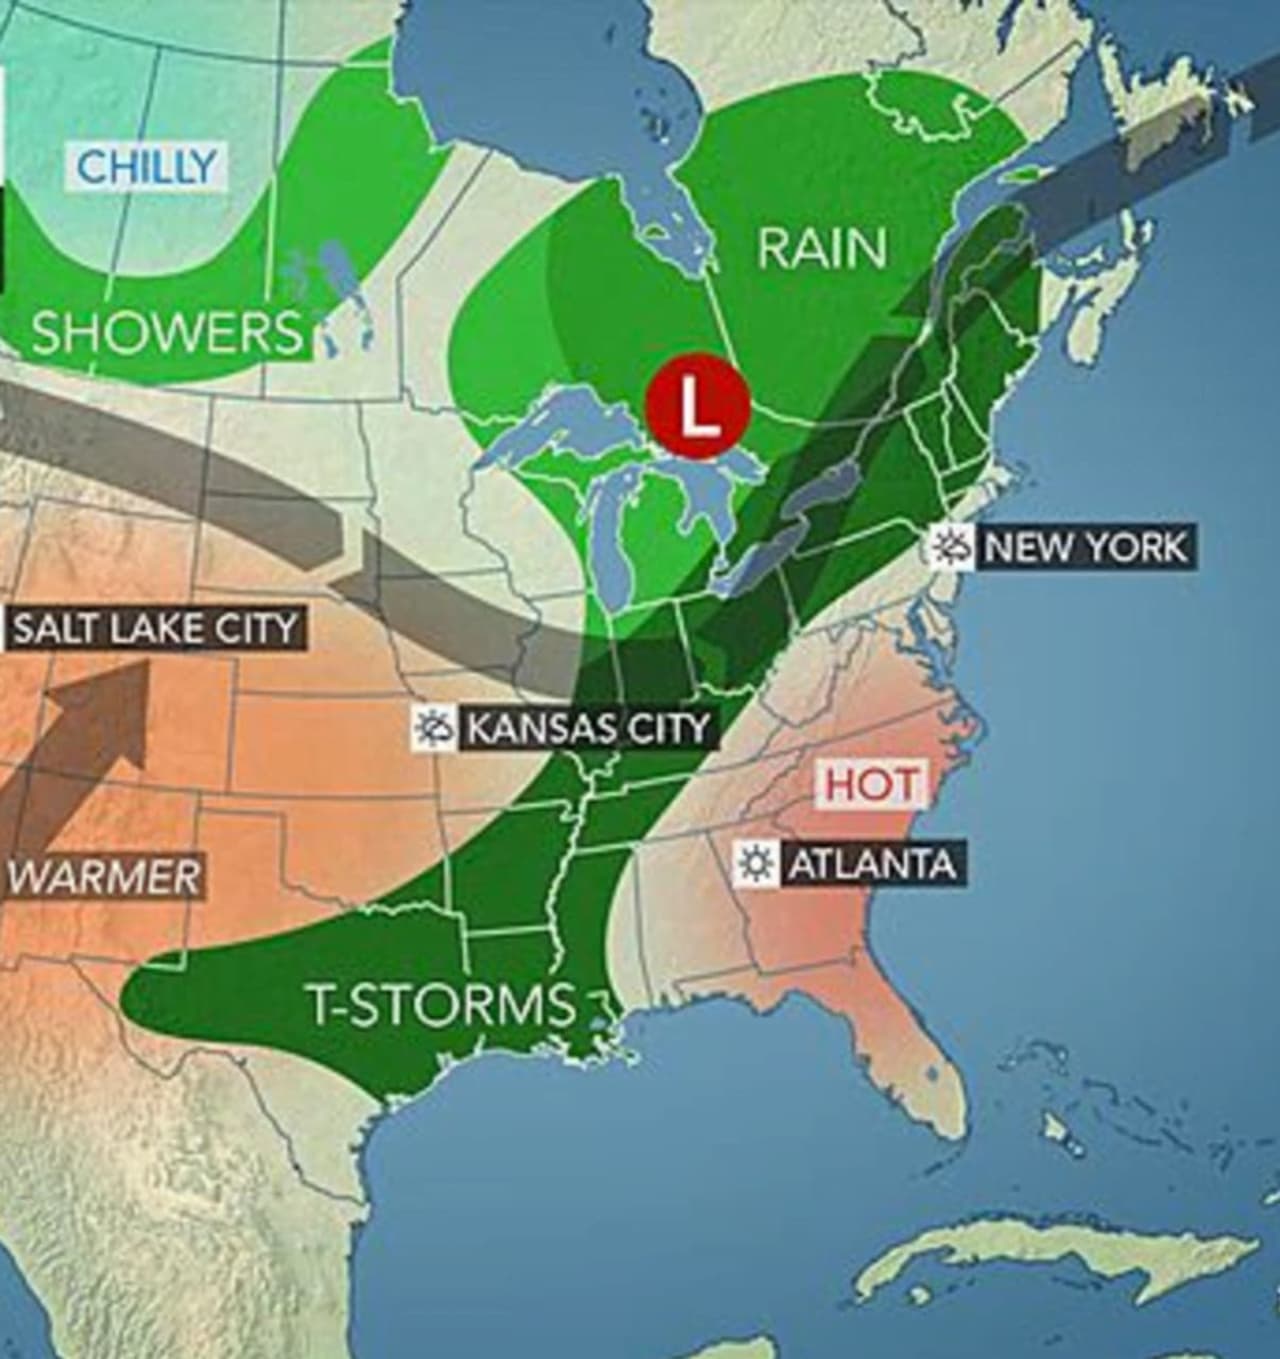 Thunderstorms will usher in comfortable, more September-like weather in the area.